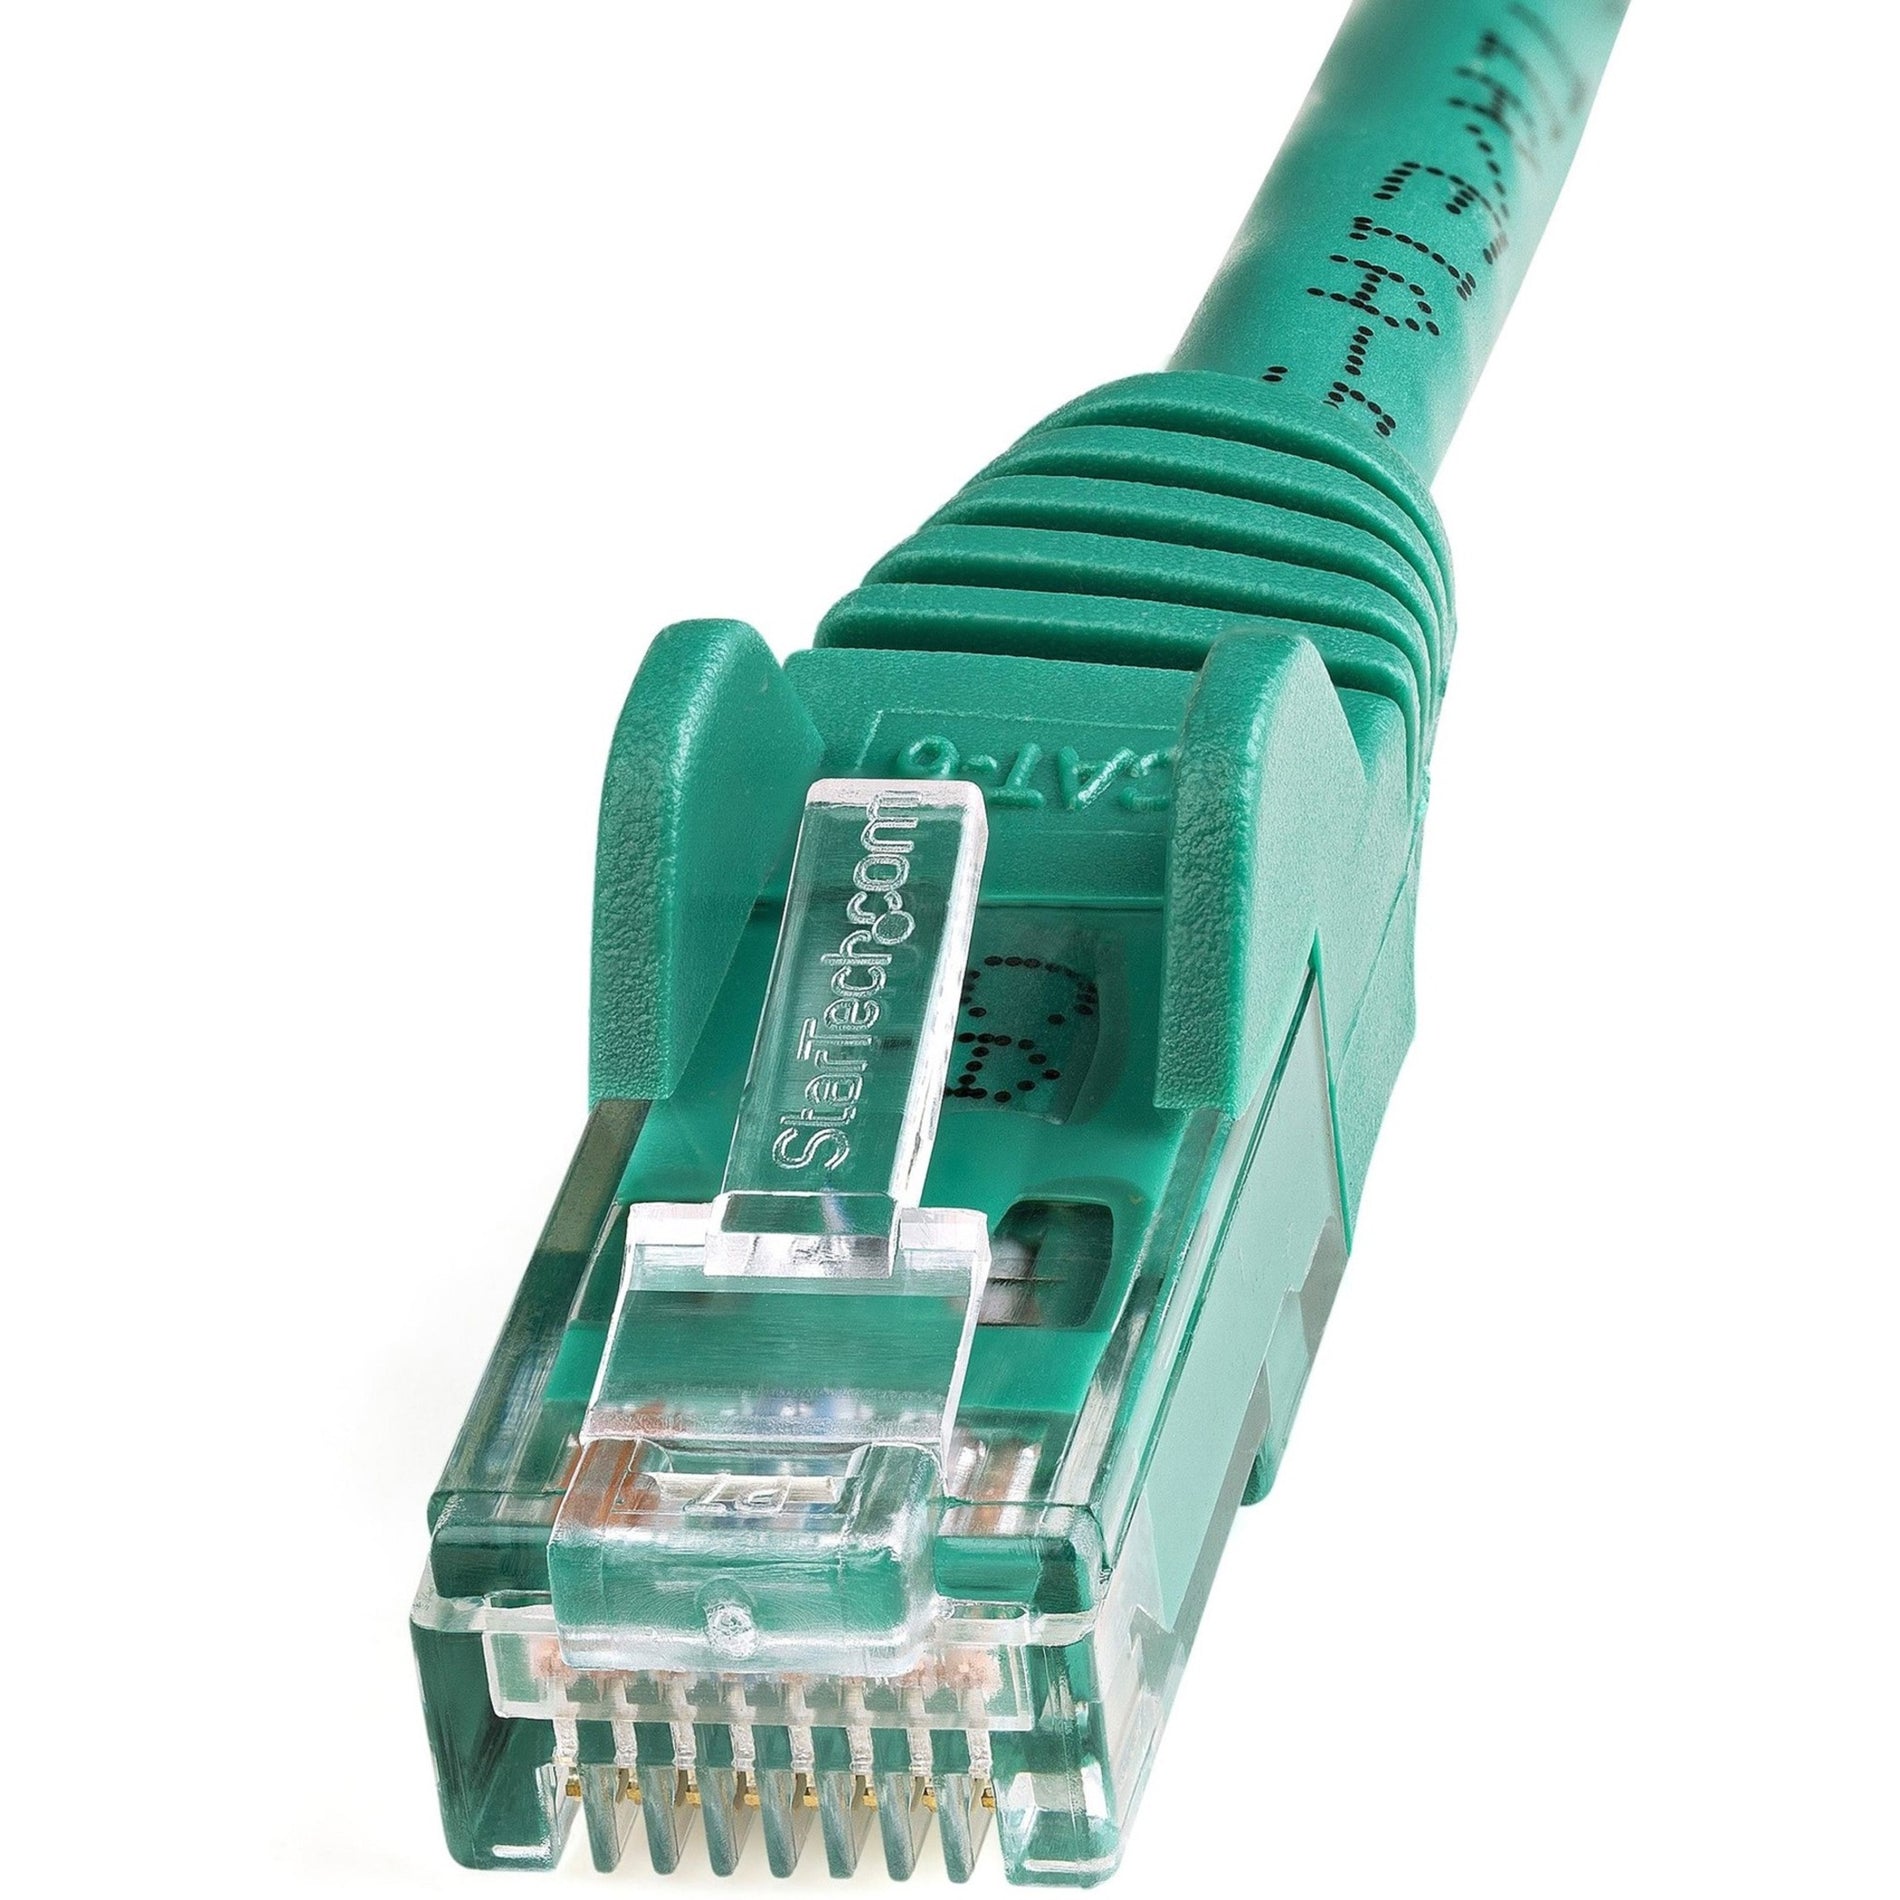 StarTech.com N6PATCH35GN 35 ft Green Snagless Cat6 UTP Patch Cable, Lifetime Warranty, 10 Gbit/s Data Transfer Rate